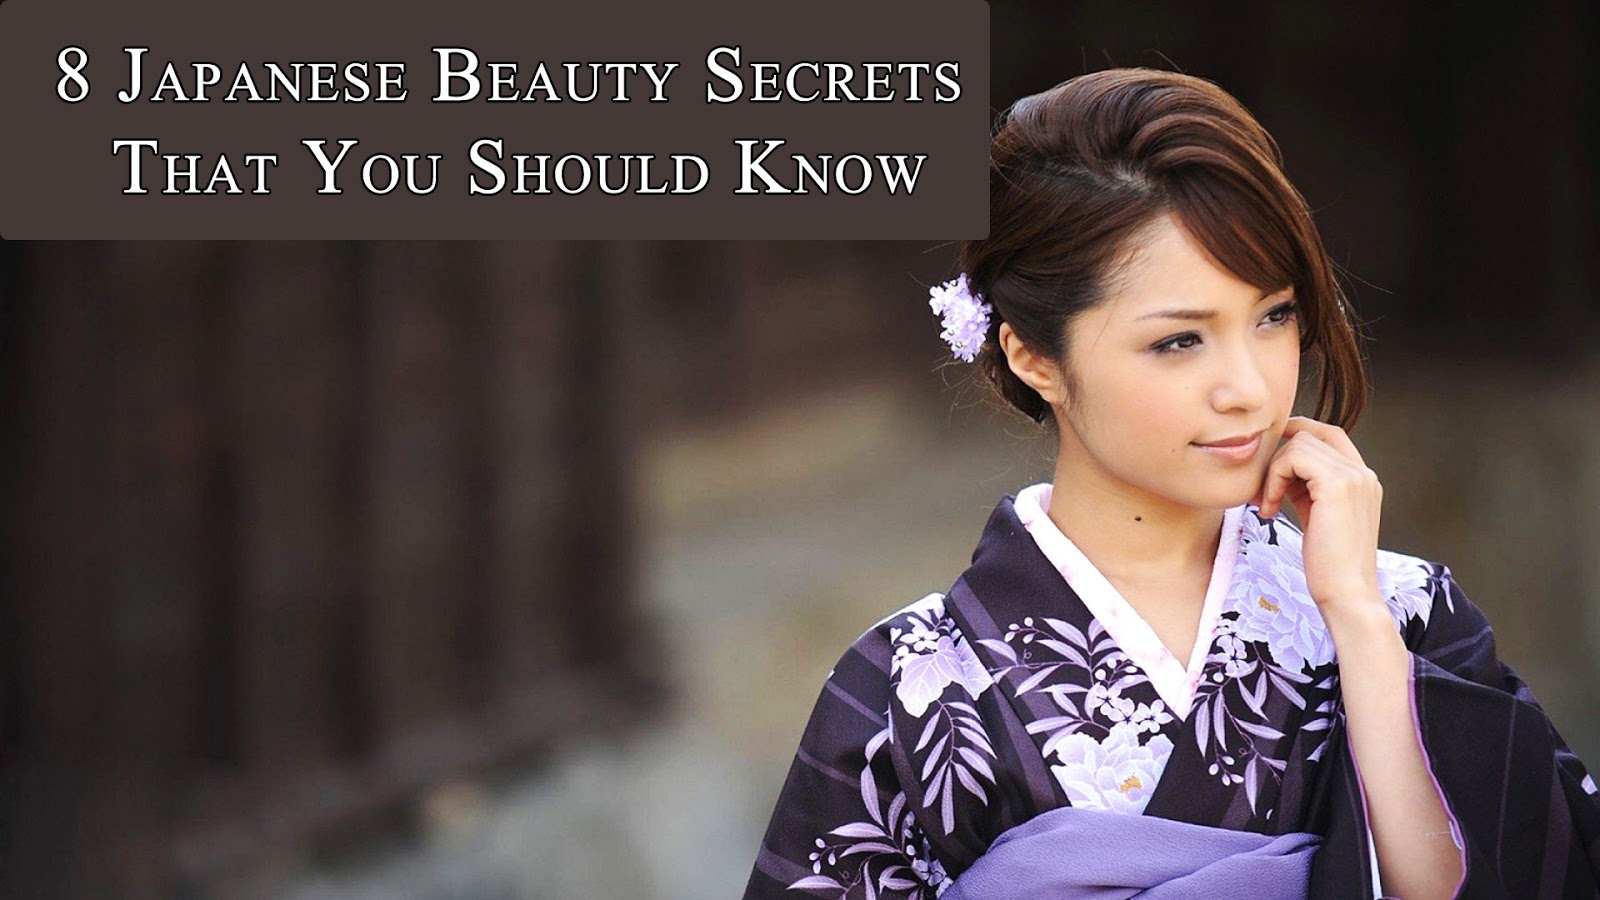 8 Japanese Beauty Secrets That You Should Know